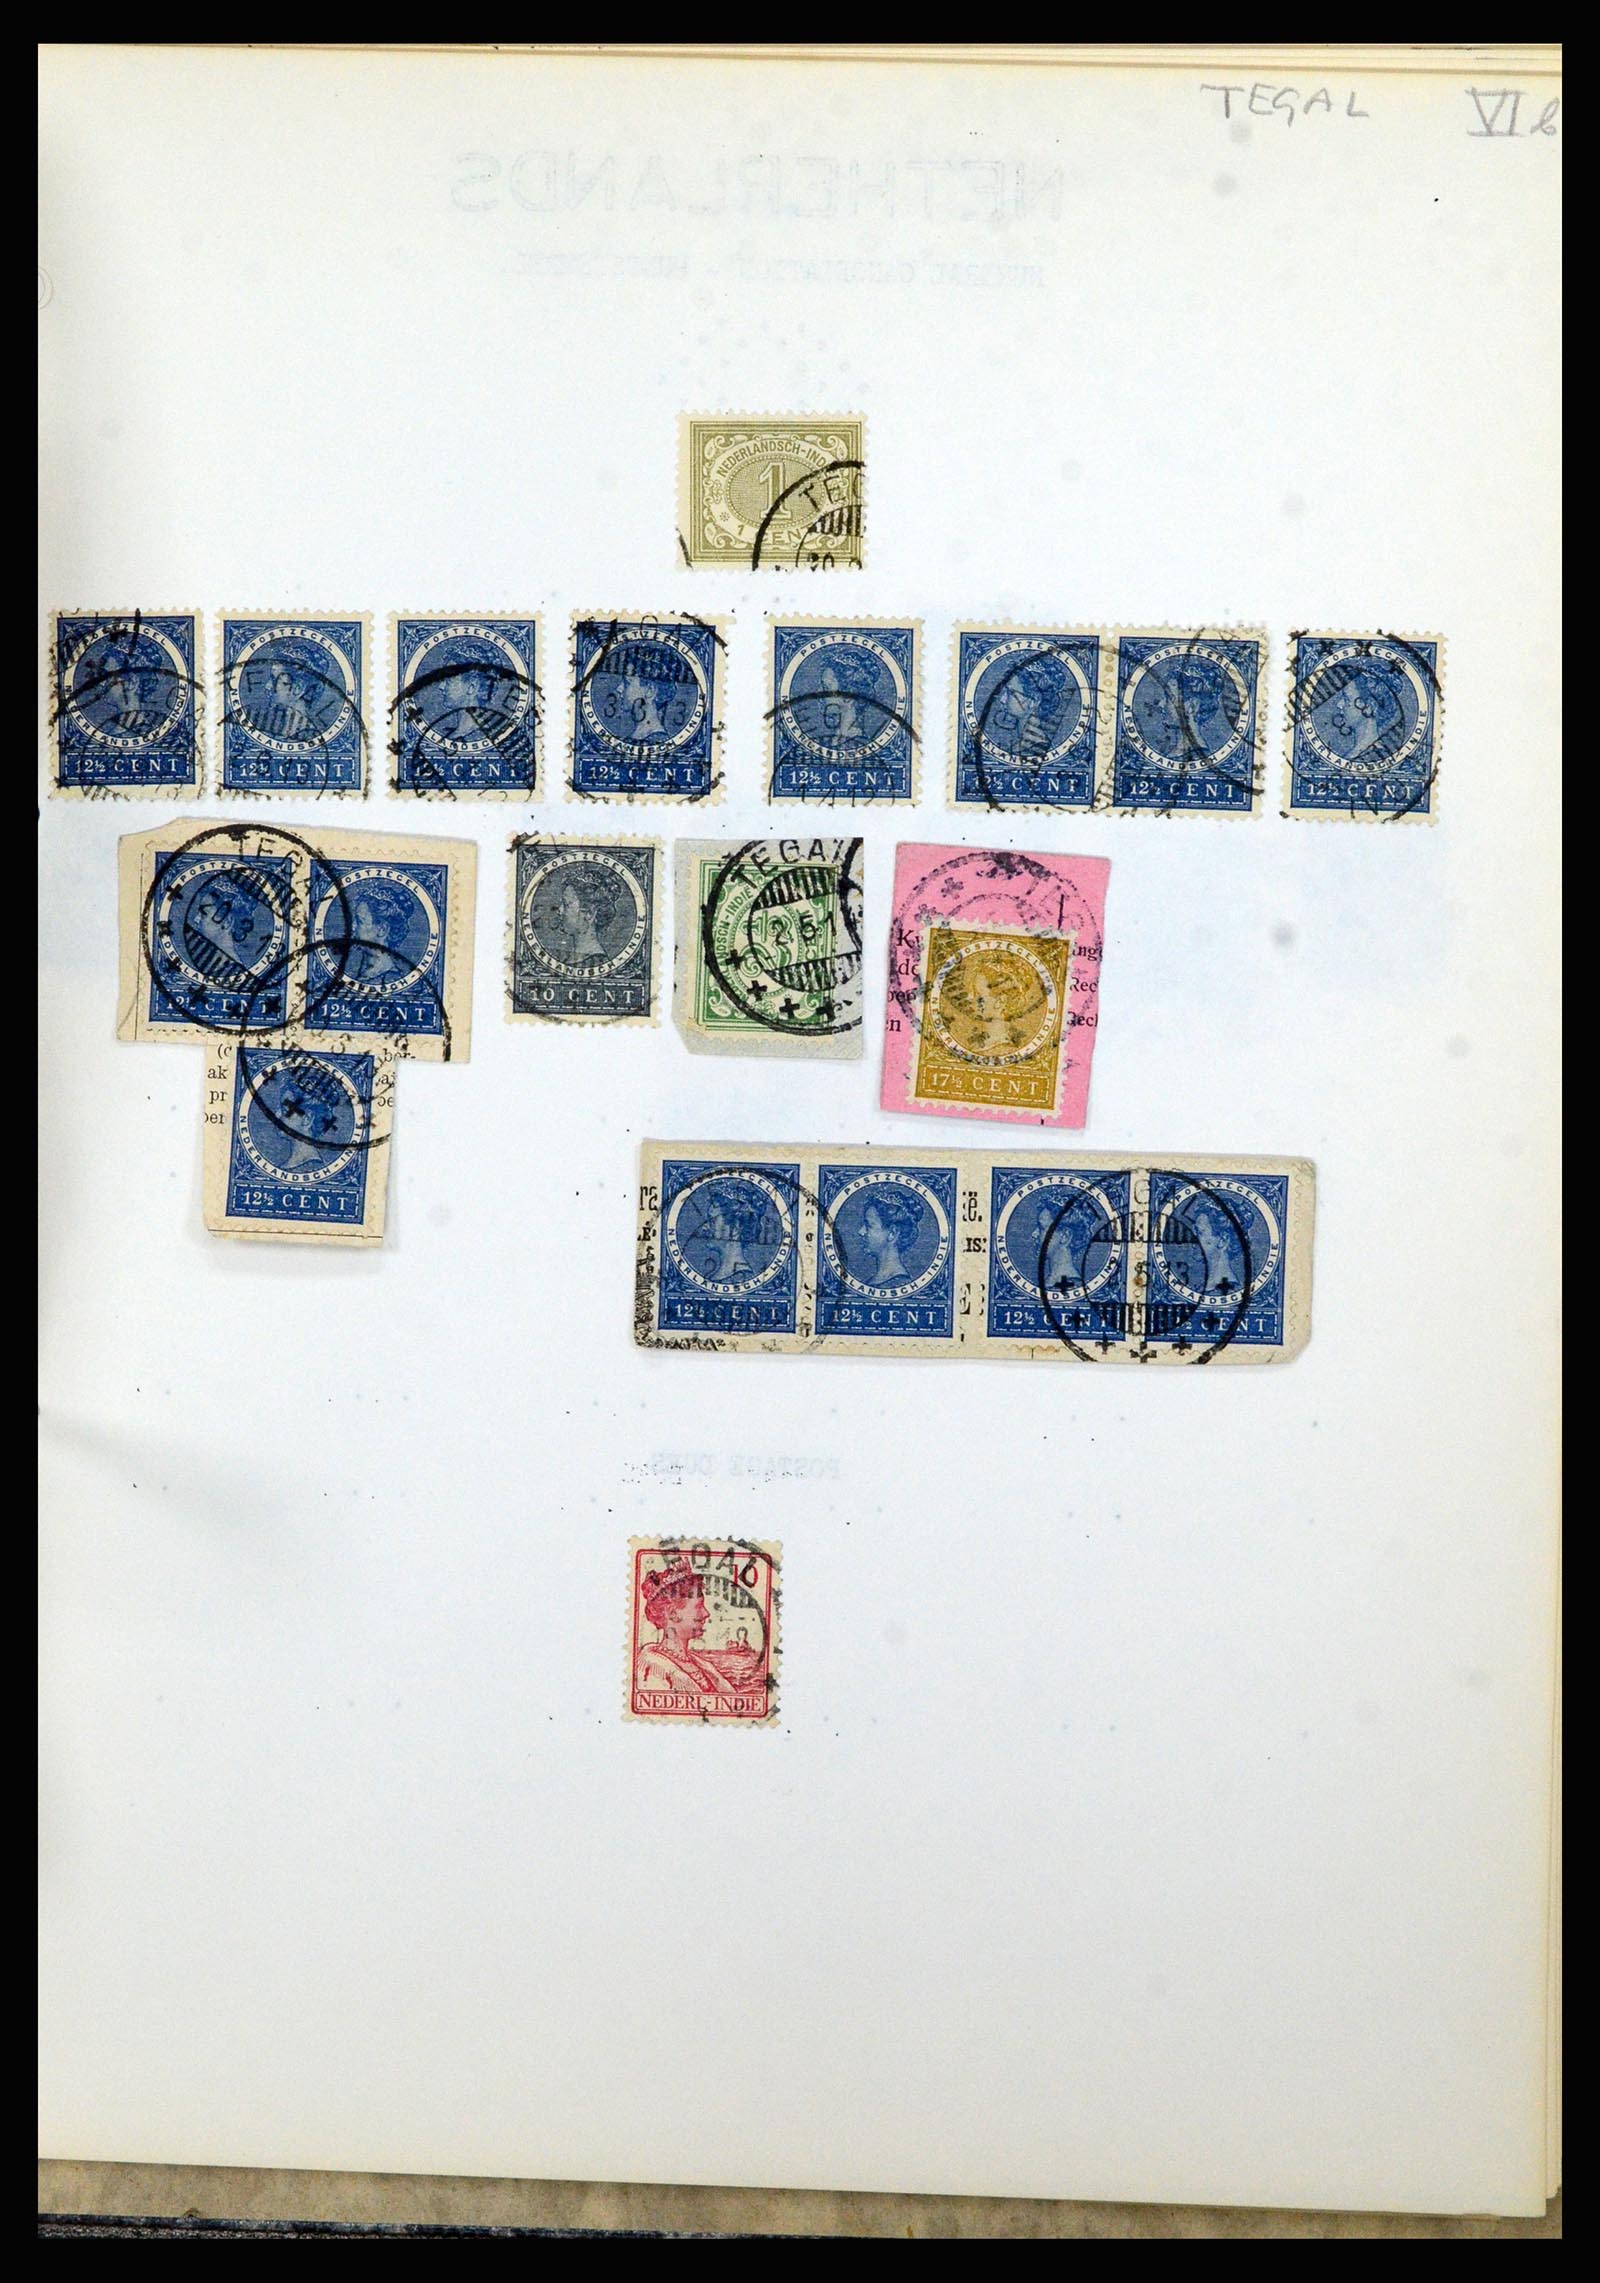 36841 161 - Stamp collection 36841 Dutch east Indies short bar cancels.